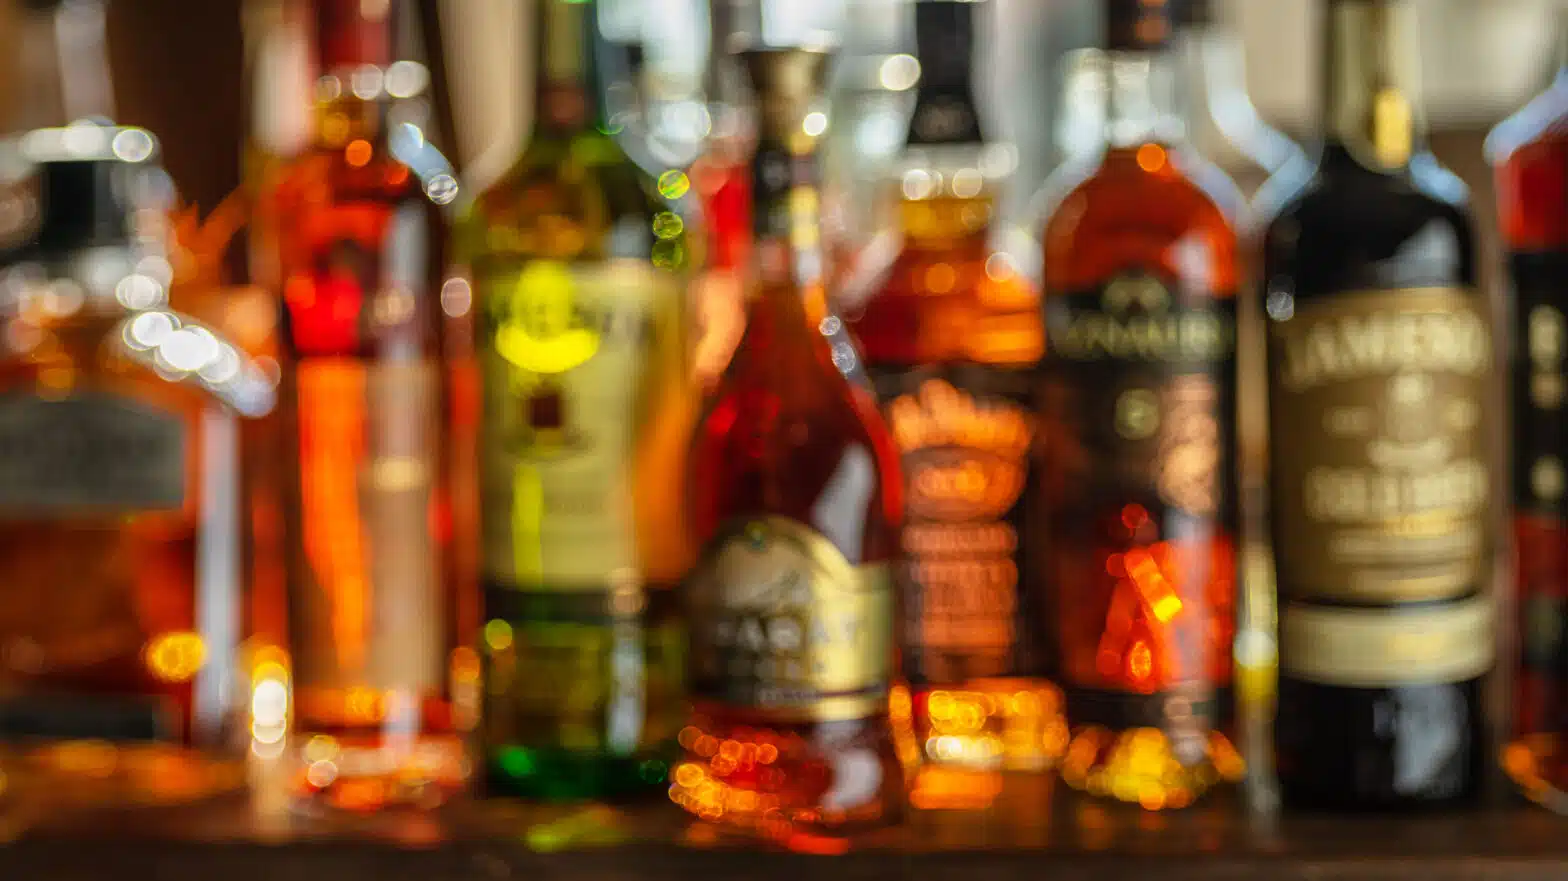 A blurred image of multiple liquor bottles - Am I Drinking Too Much